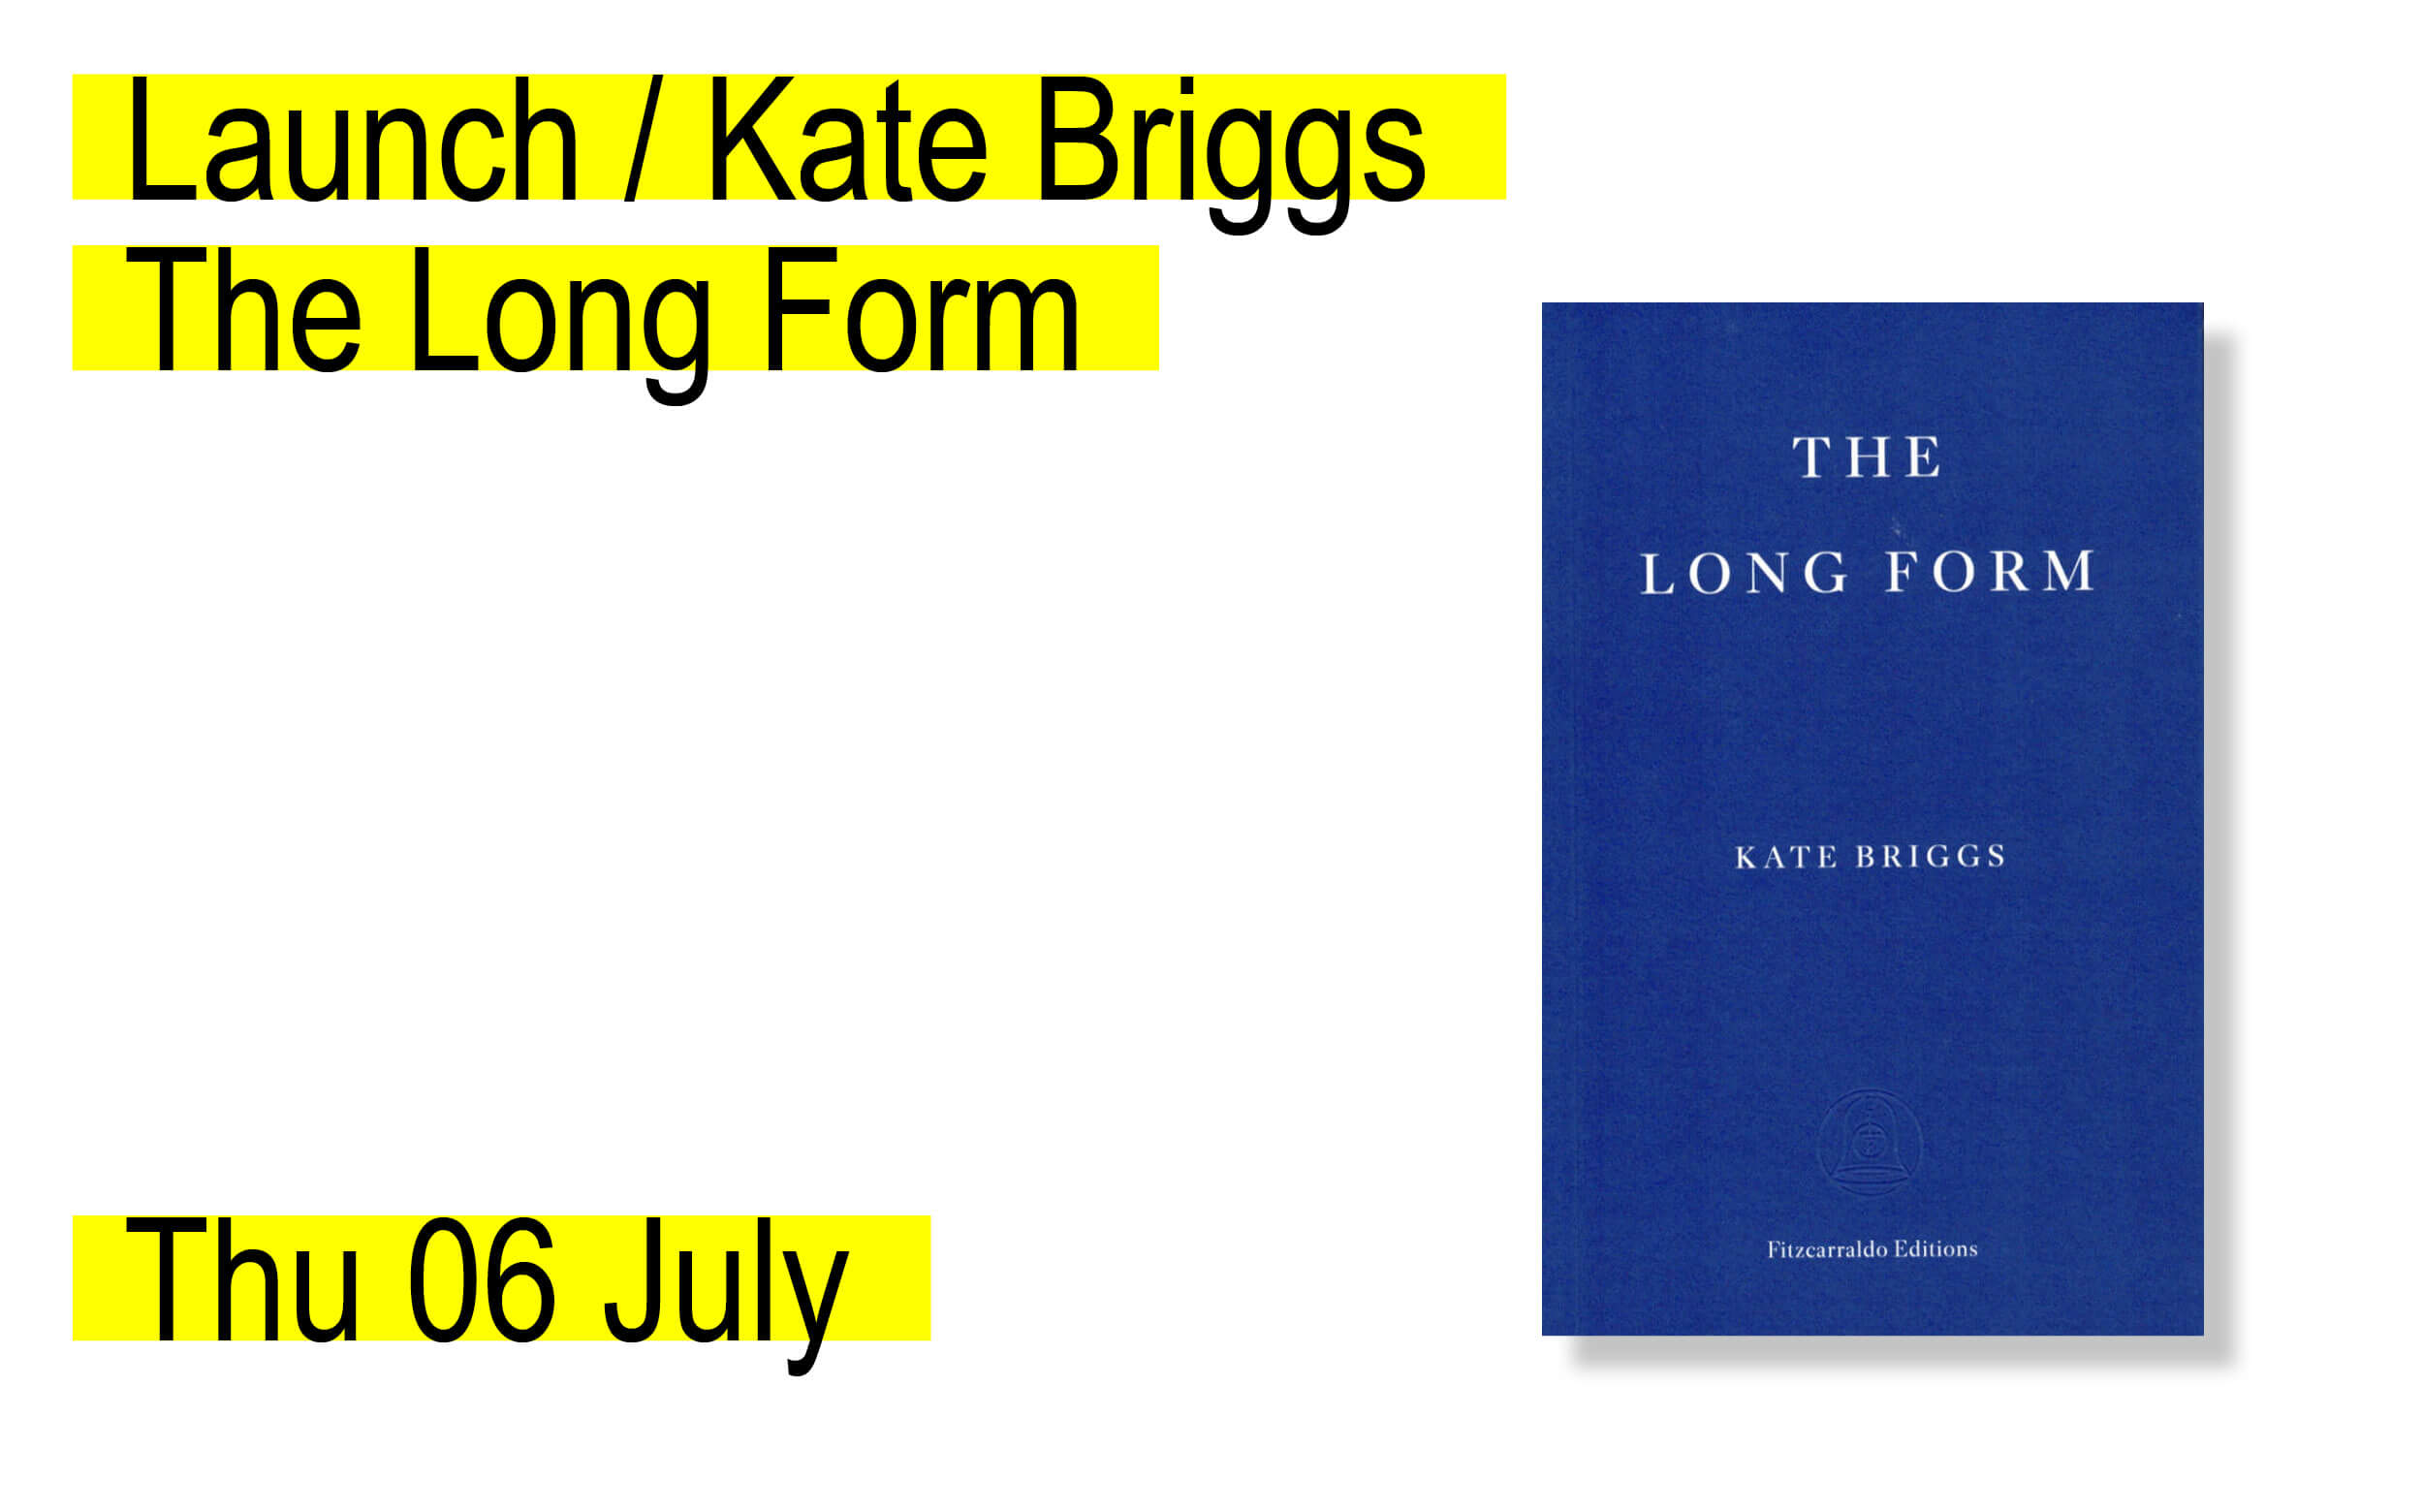 [Launch] The Long Form by Kate Briggs